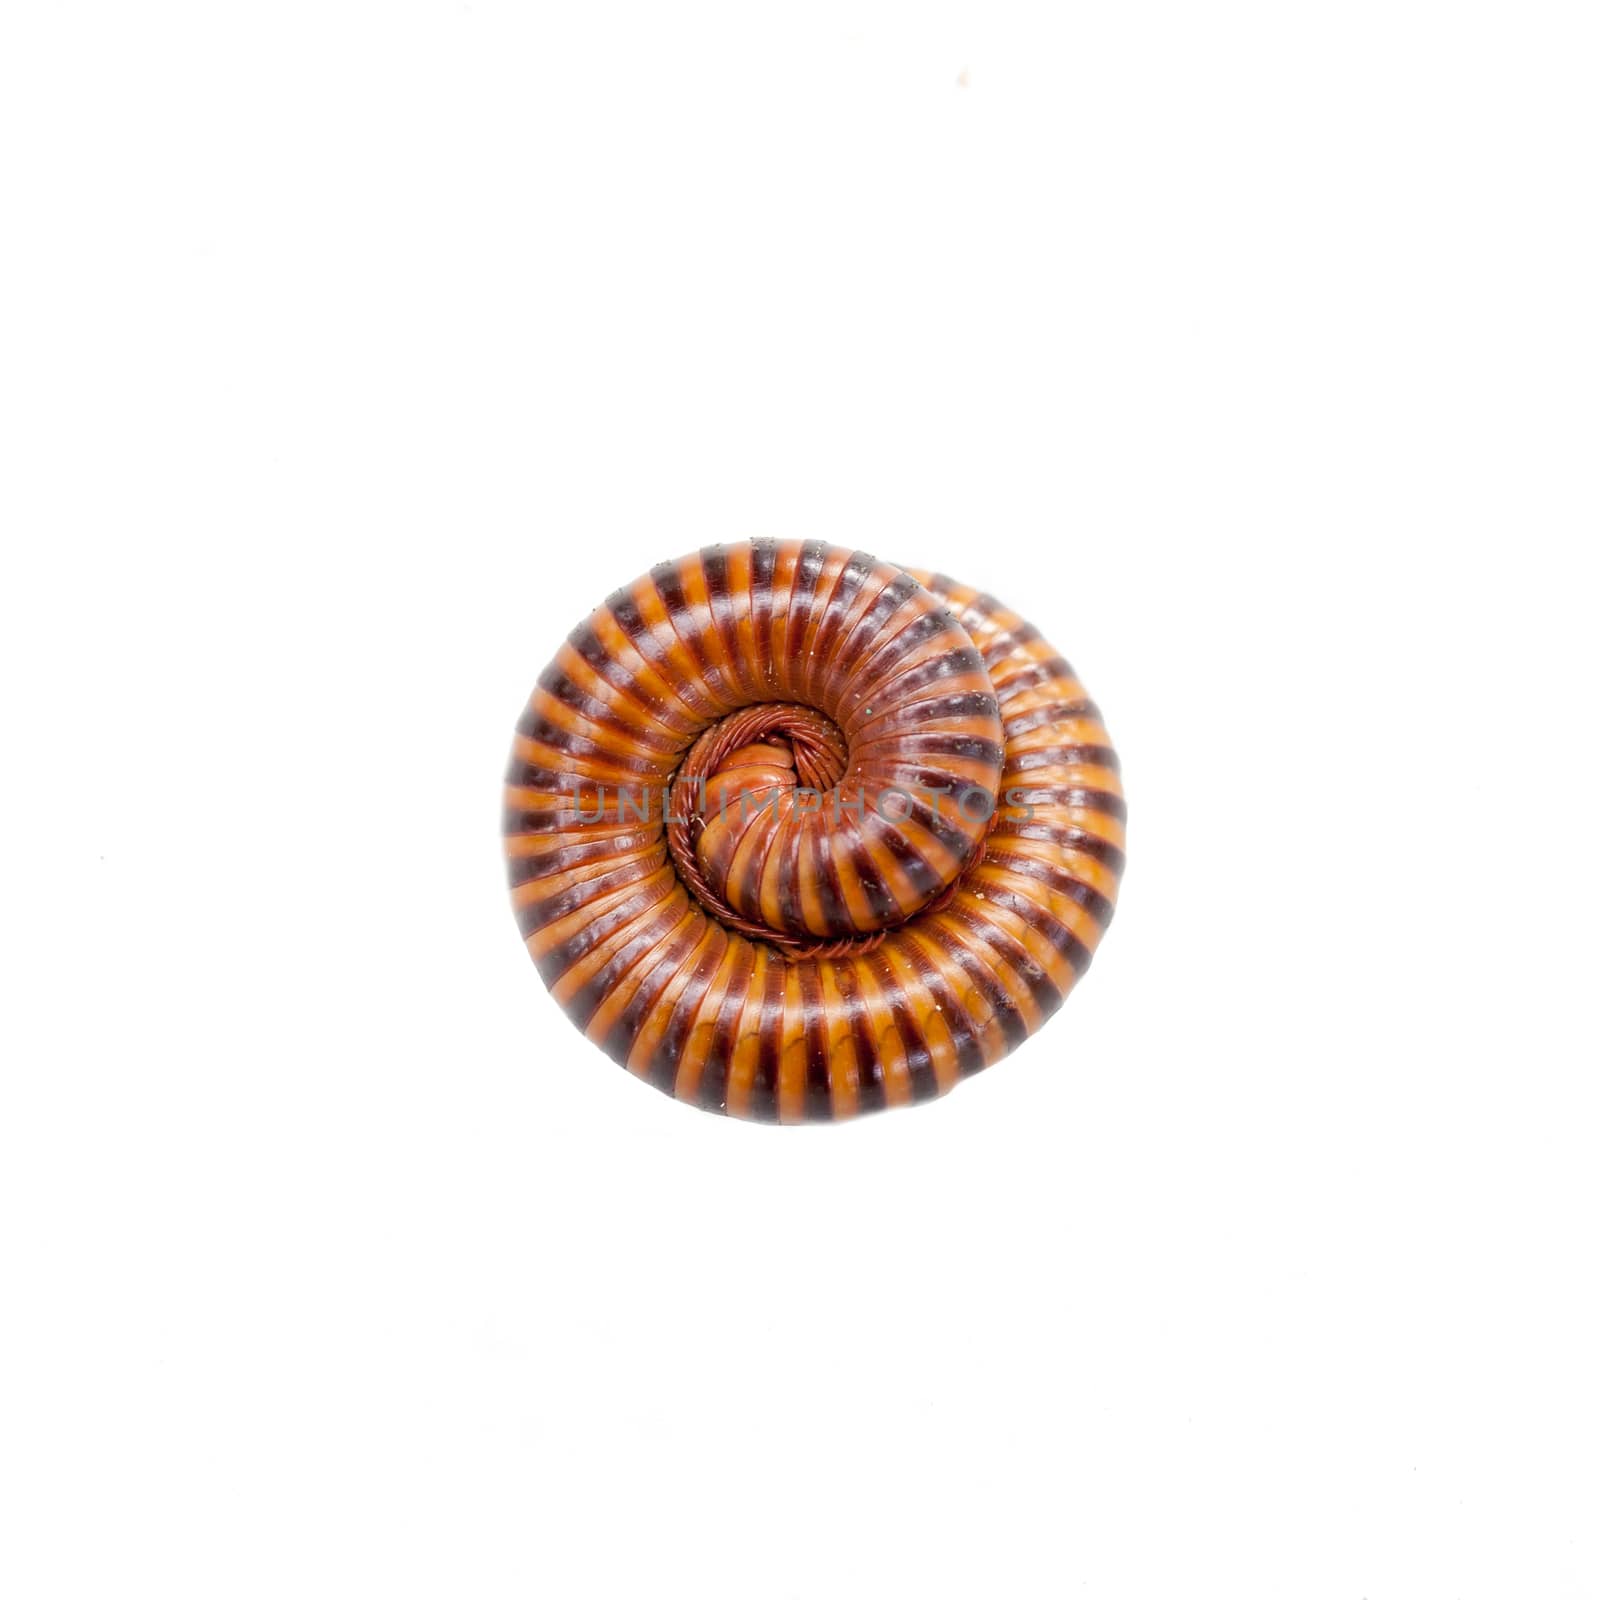 Millipede in isolated on white background .